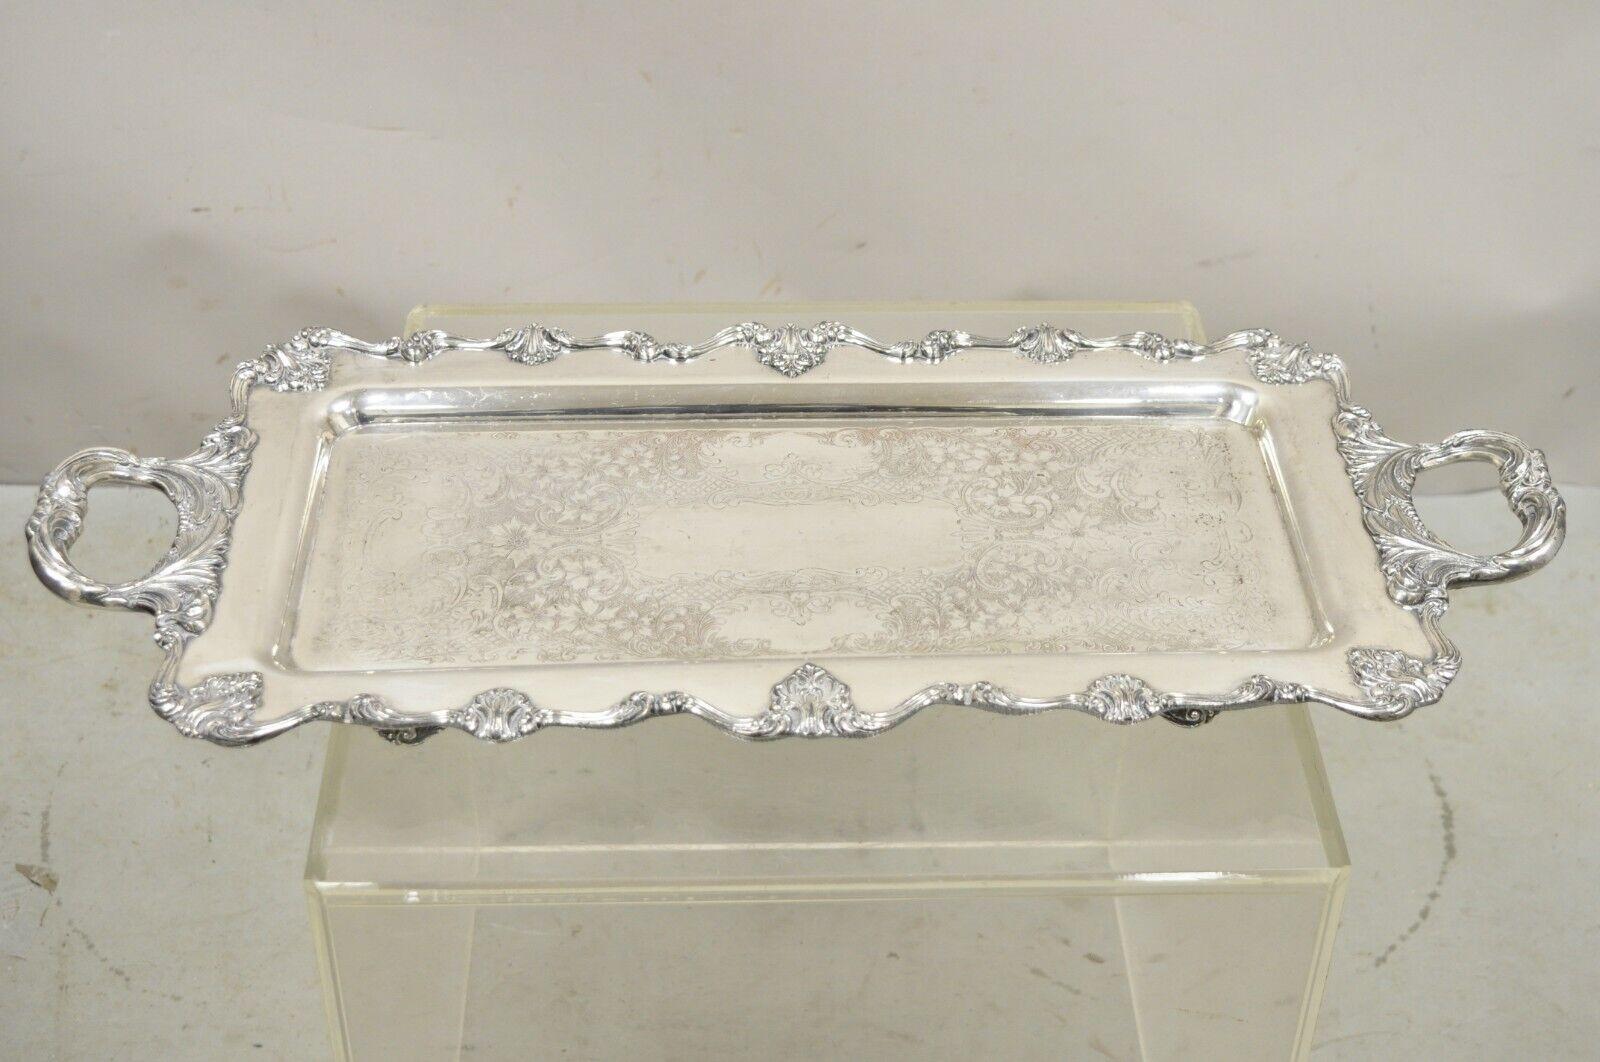 Vintage English Victorian Narrow Silver Plate Twin Handle Serving Platter Tray. Item features ornate leafy scroll twin handles, nice narrow form, original hallmark. Circa Early to mid 20th century. Measurements:  1.5